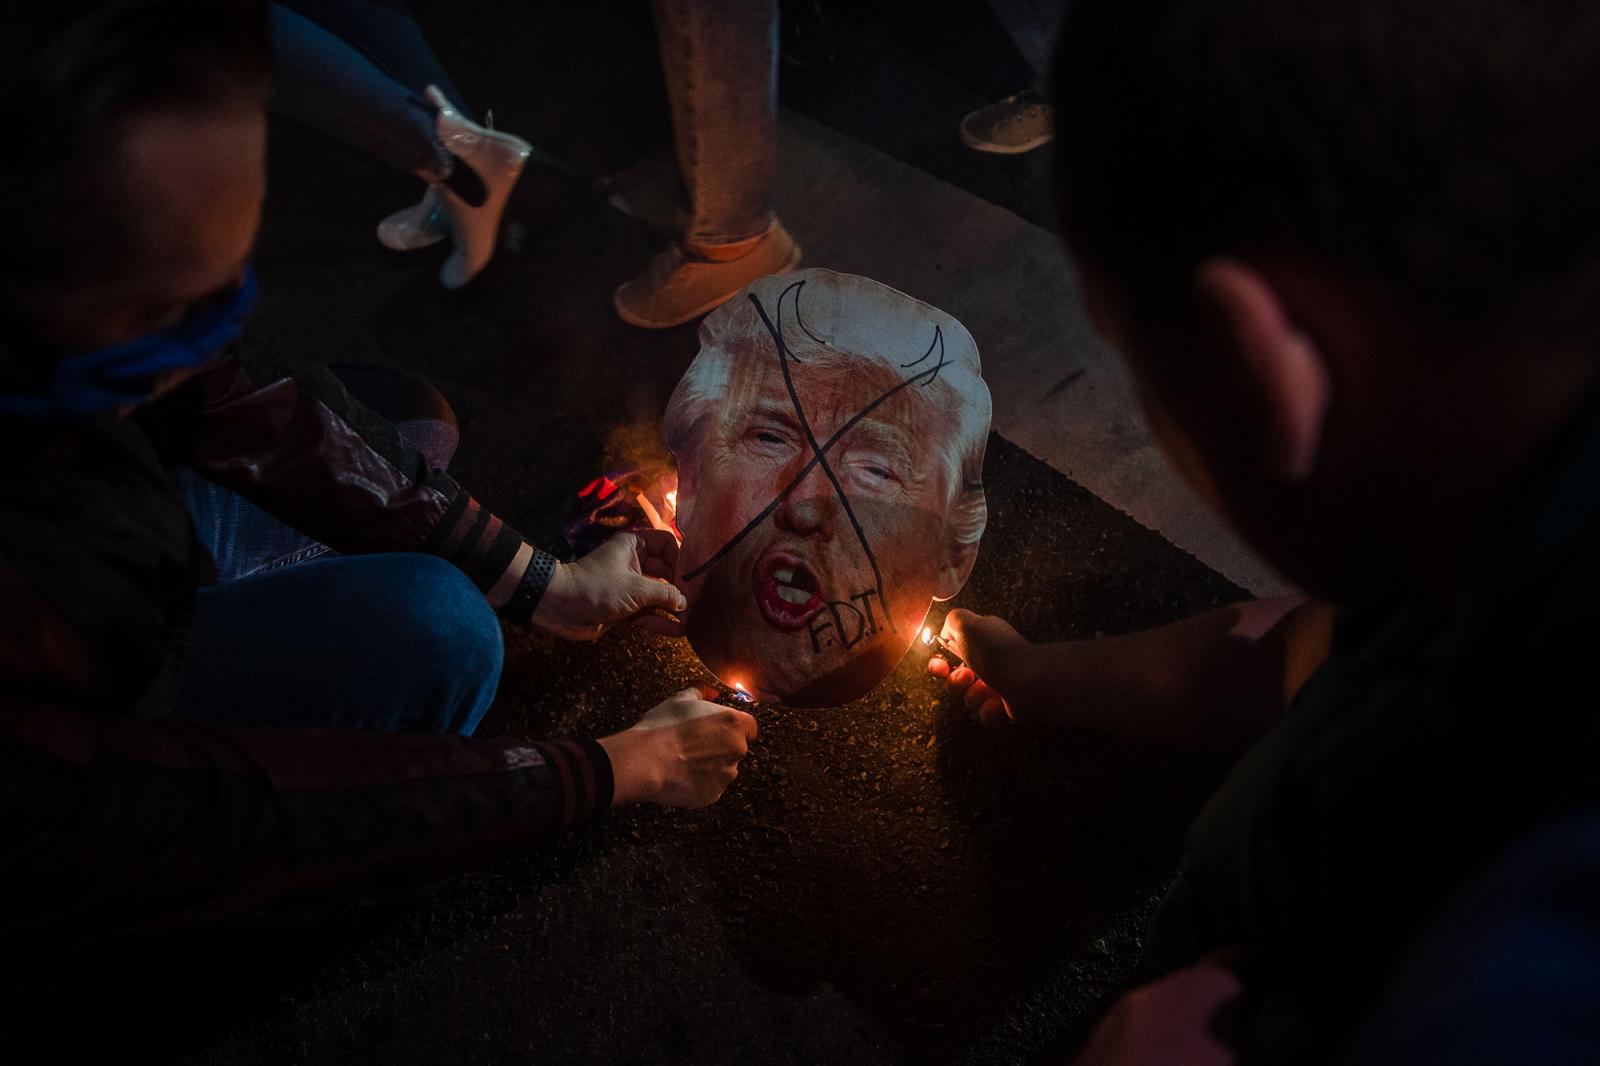 Image from United States - Men set a cardboard cutout on fire of President Donald...